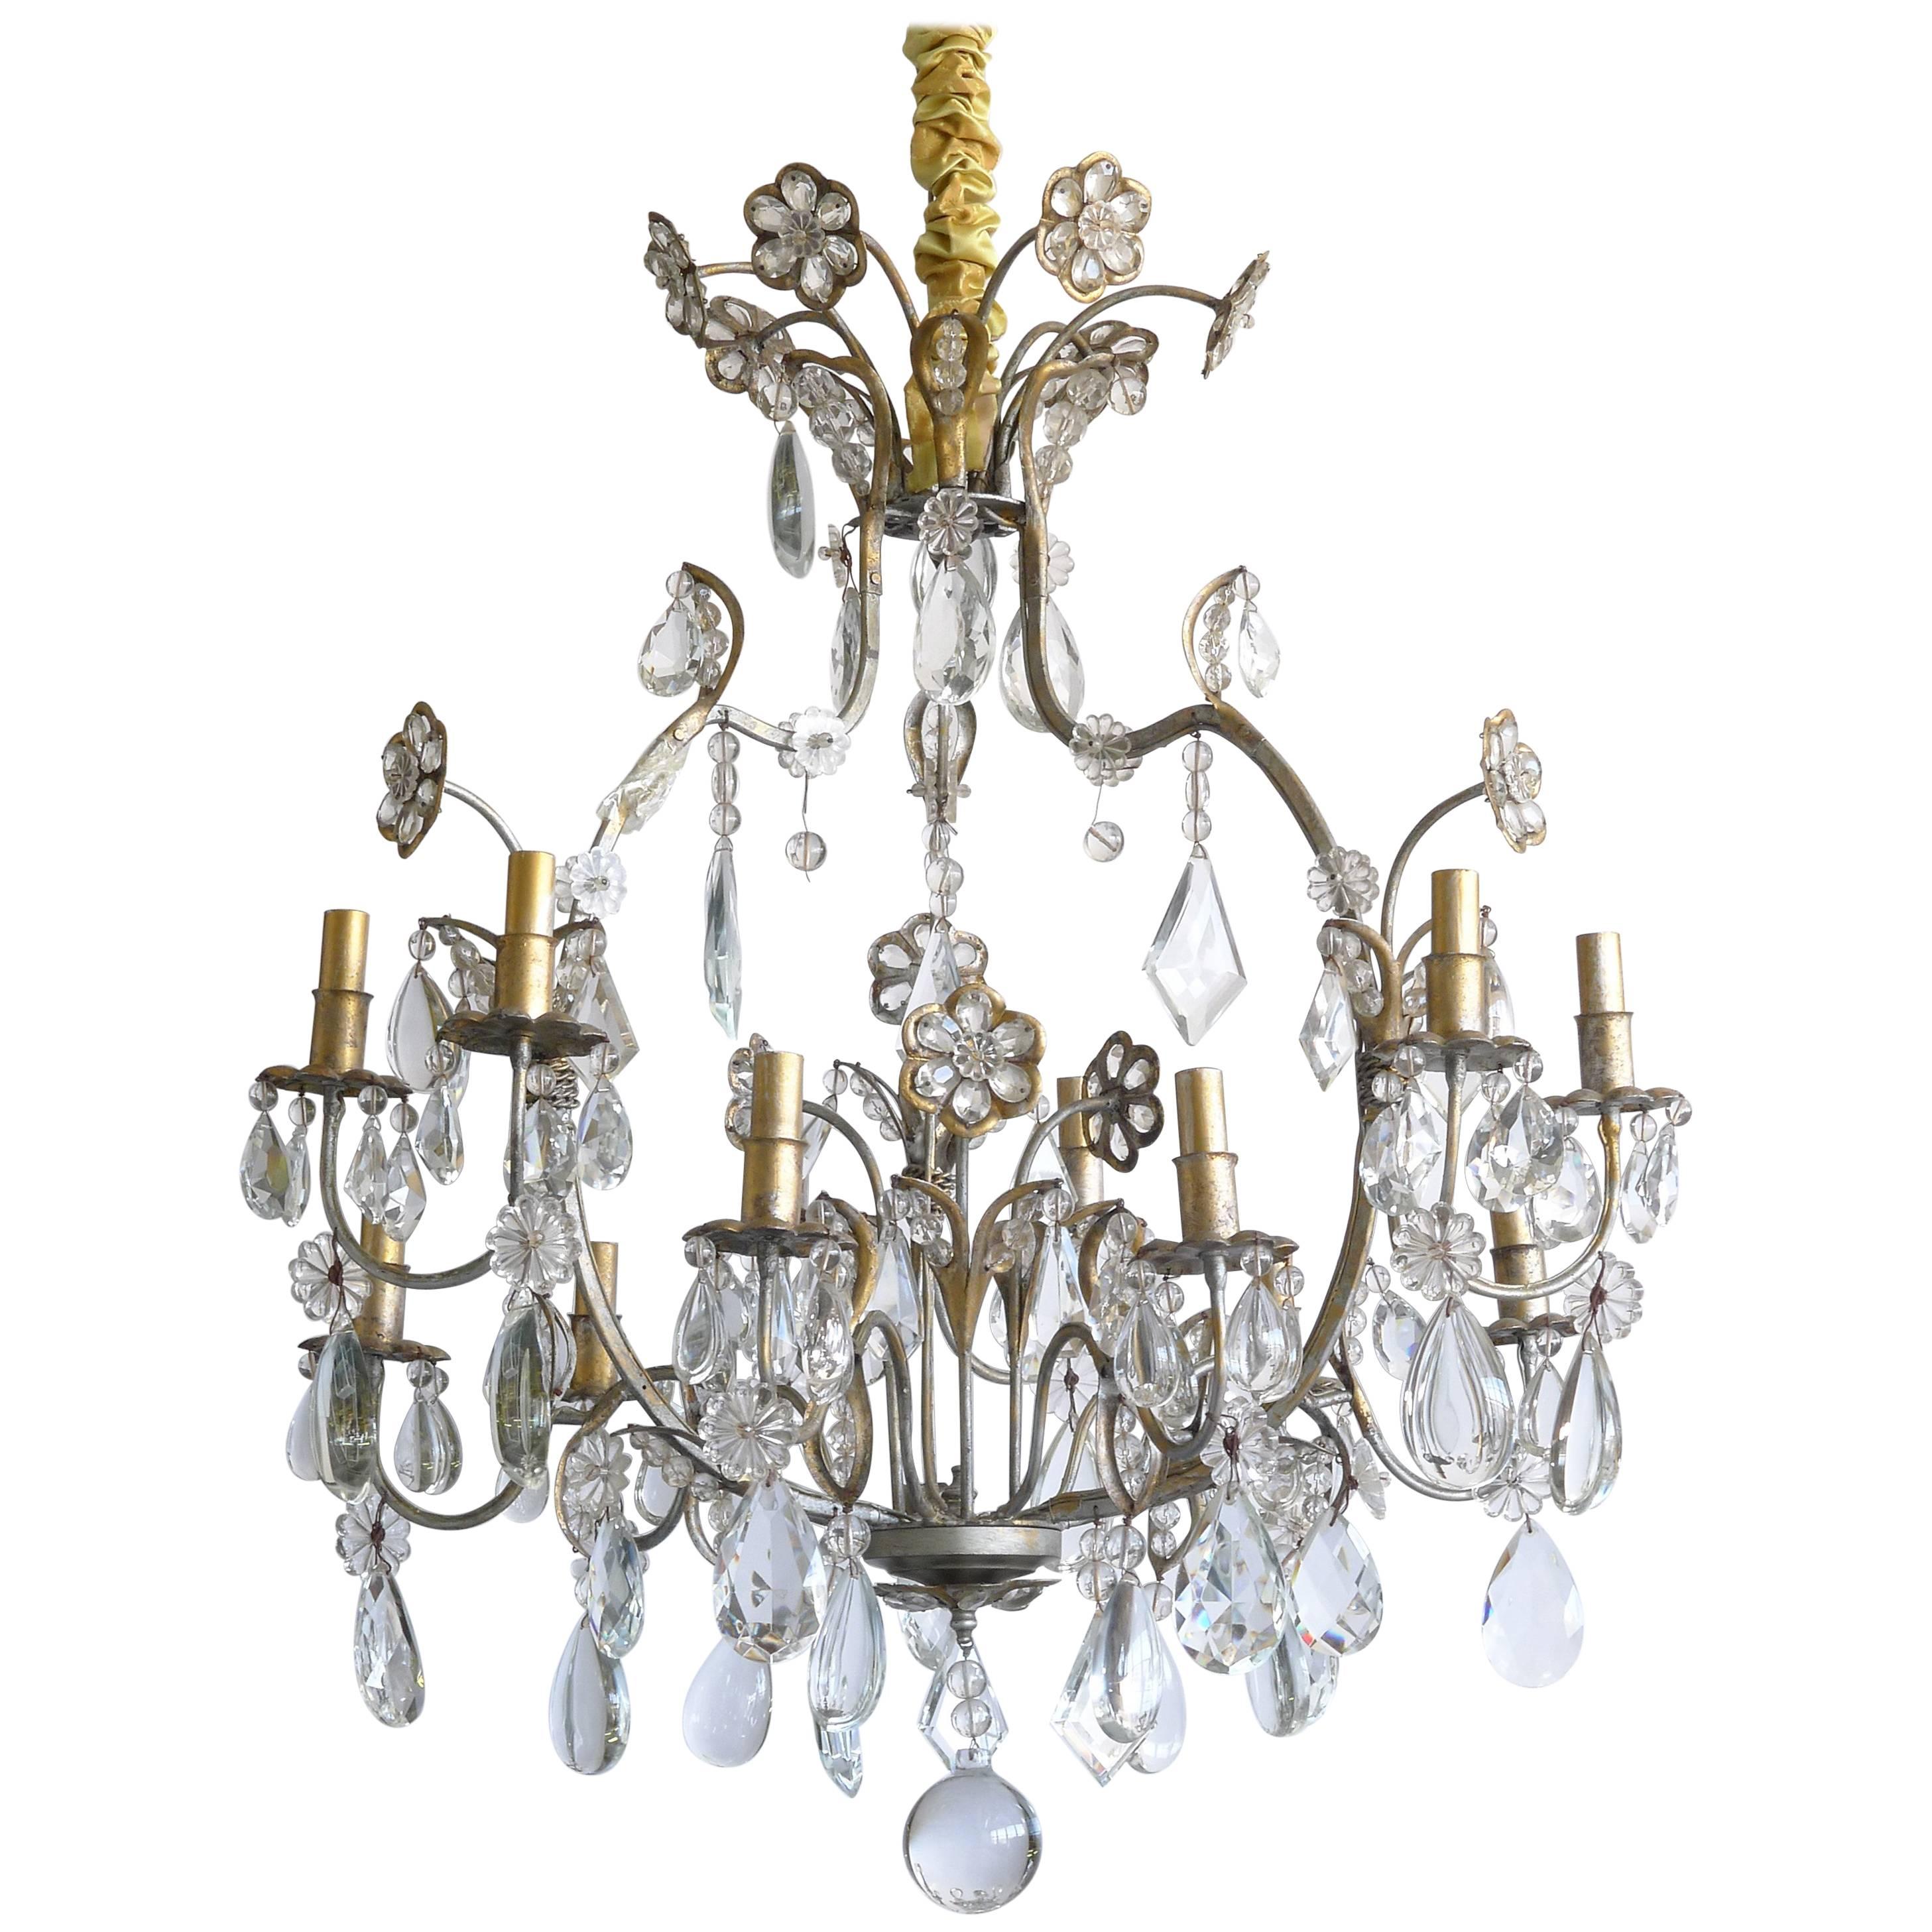 Hollywood Regency Gilt Decorated Wrought Iron and Crystal Twelve-Arm Chandelier For Sale